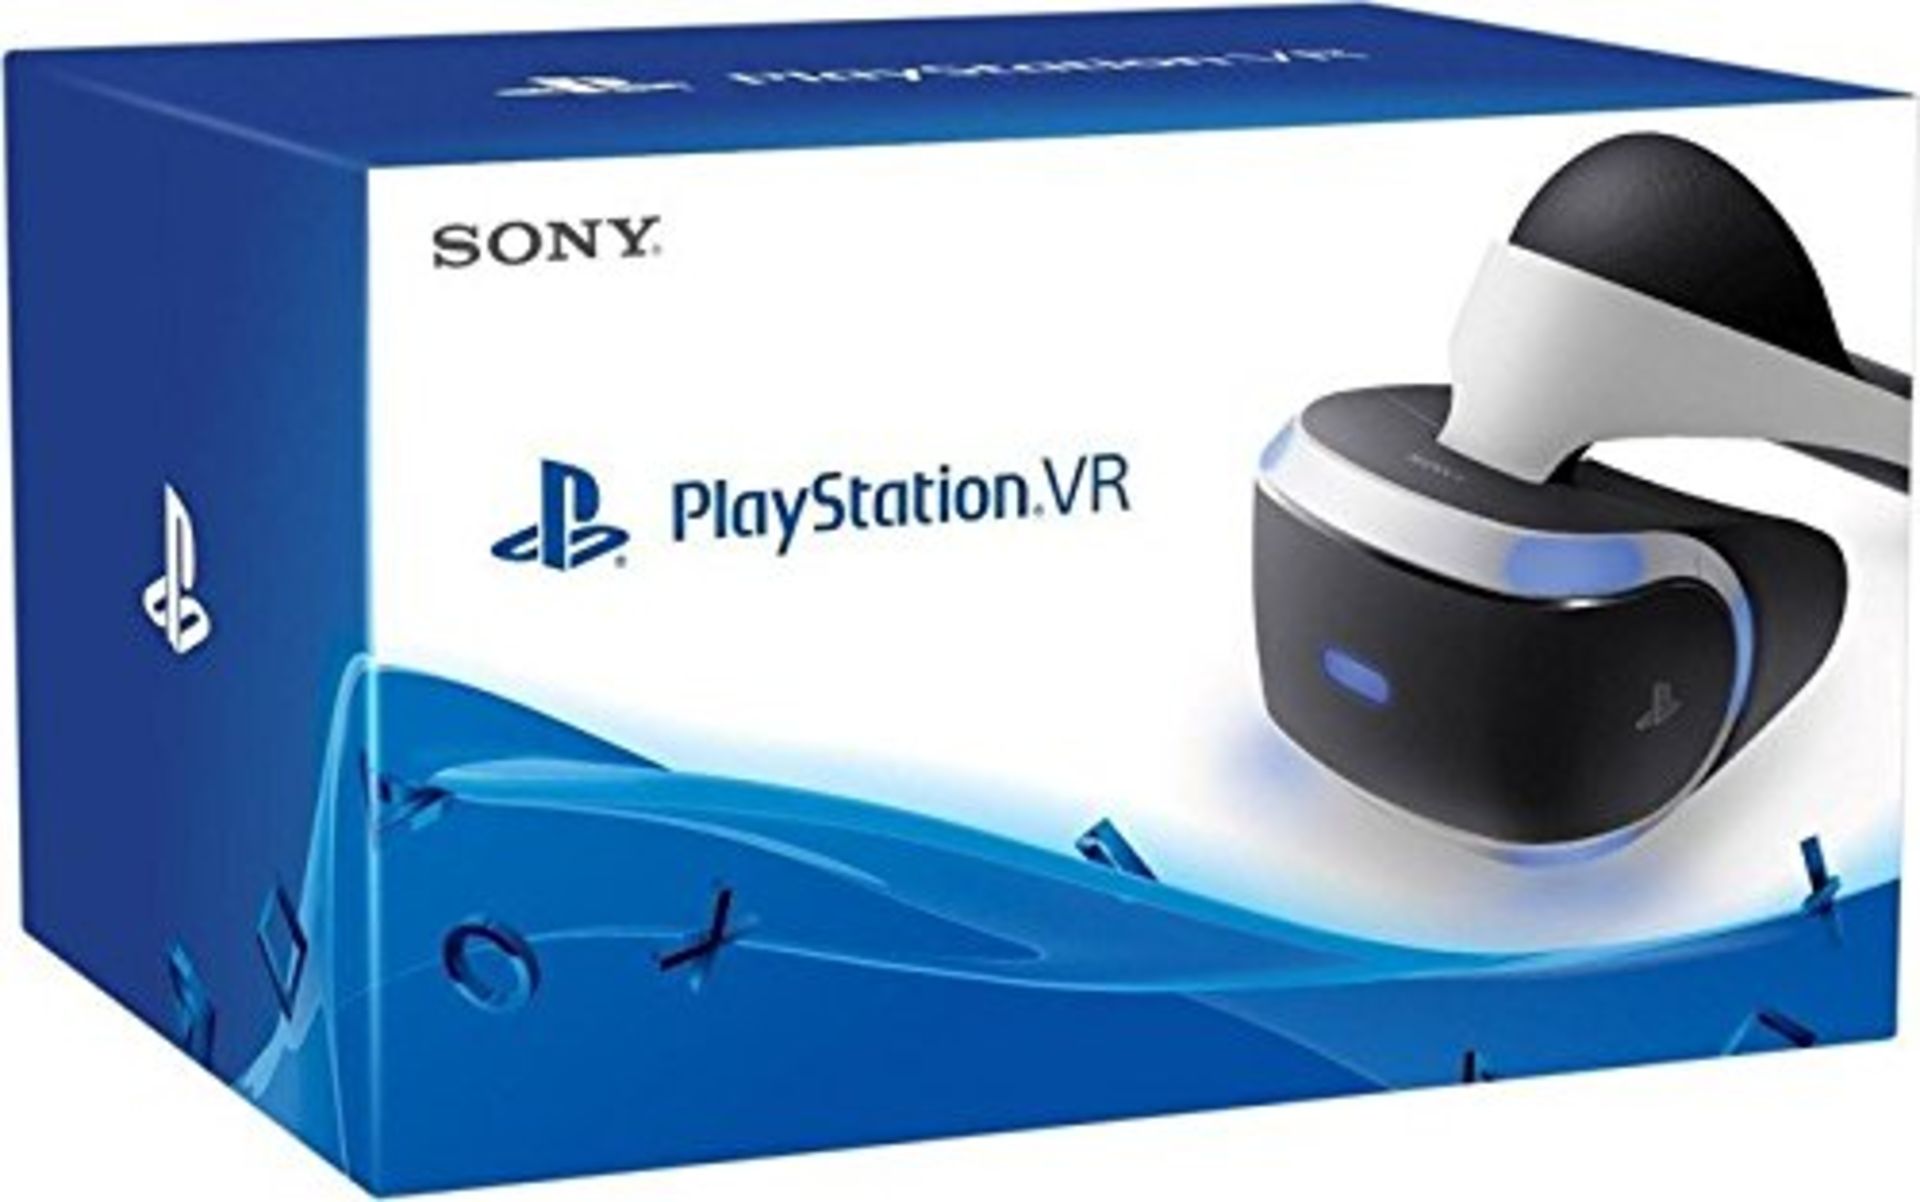 1 x Sony Playstation VR | 711719871545 | RRP £ 207.41 DAMAGED PACKAGING